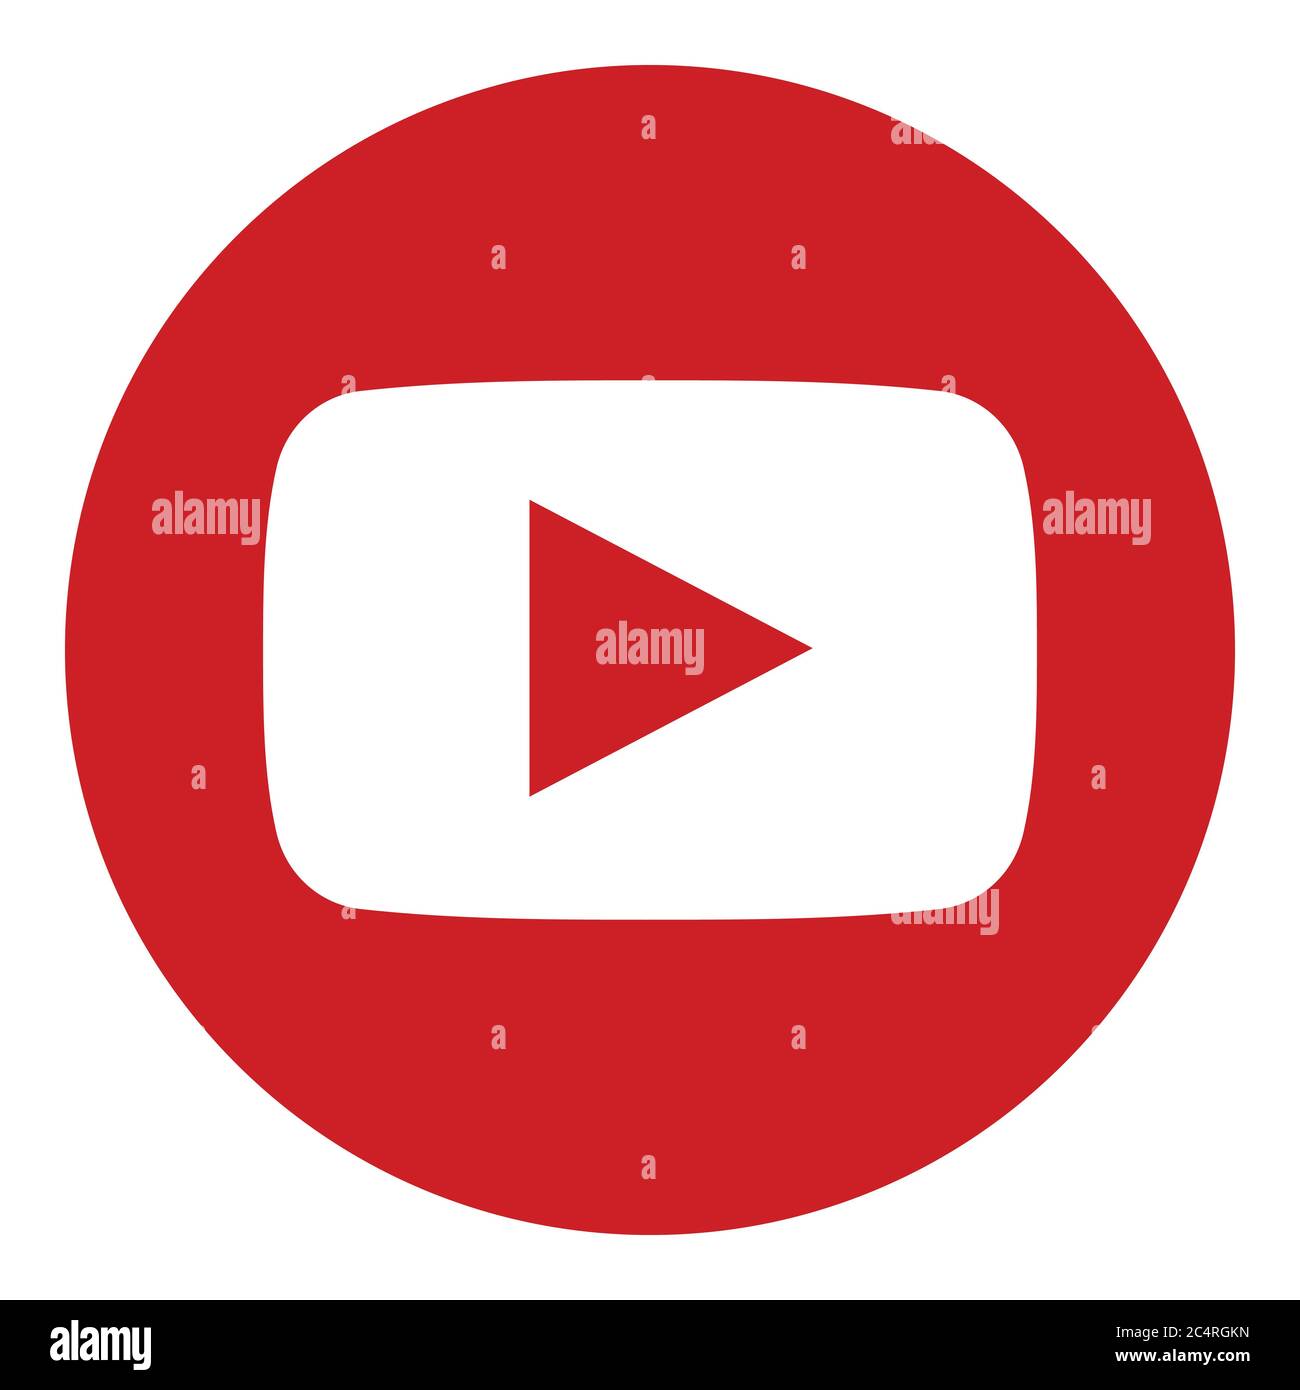 VORONEZH, RUSSIA - NOVEMBER 21, 2019: YouTube logo round icon in red color Stock Vector